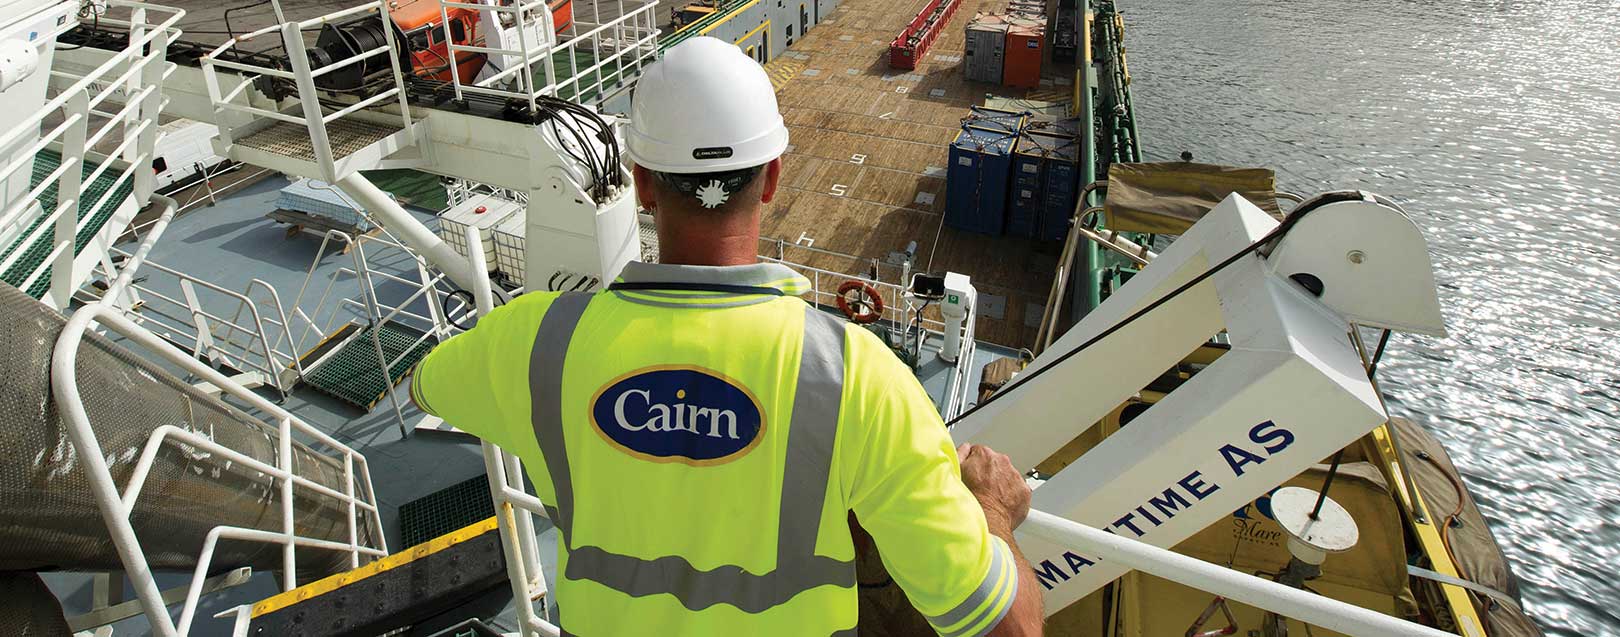 Setback to India, intl panel rejects stay on Cairn arbitration